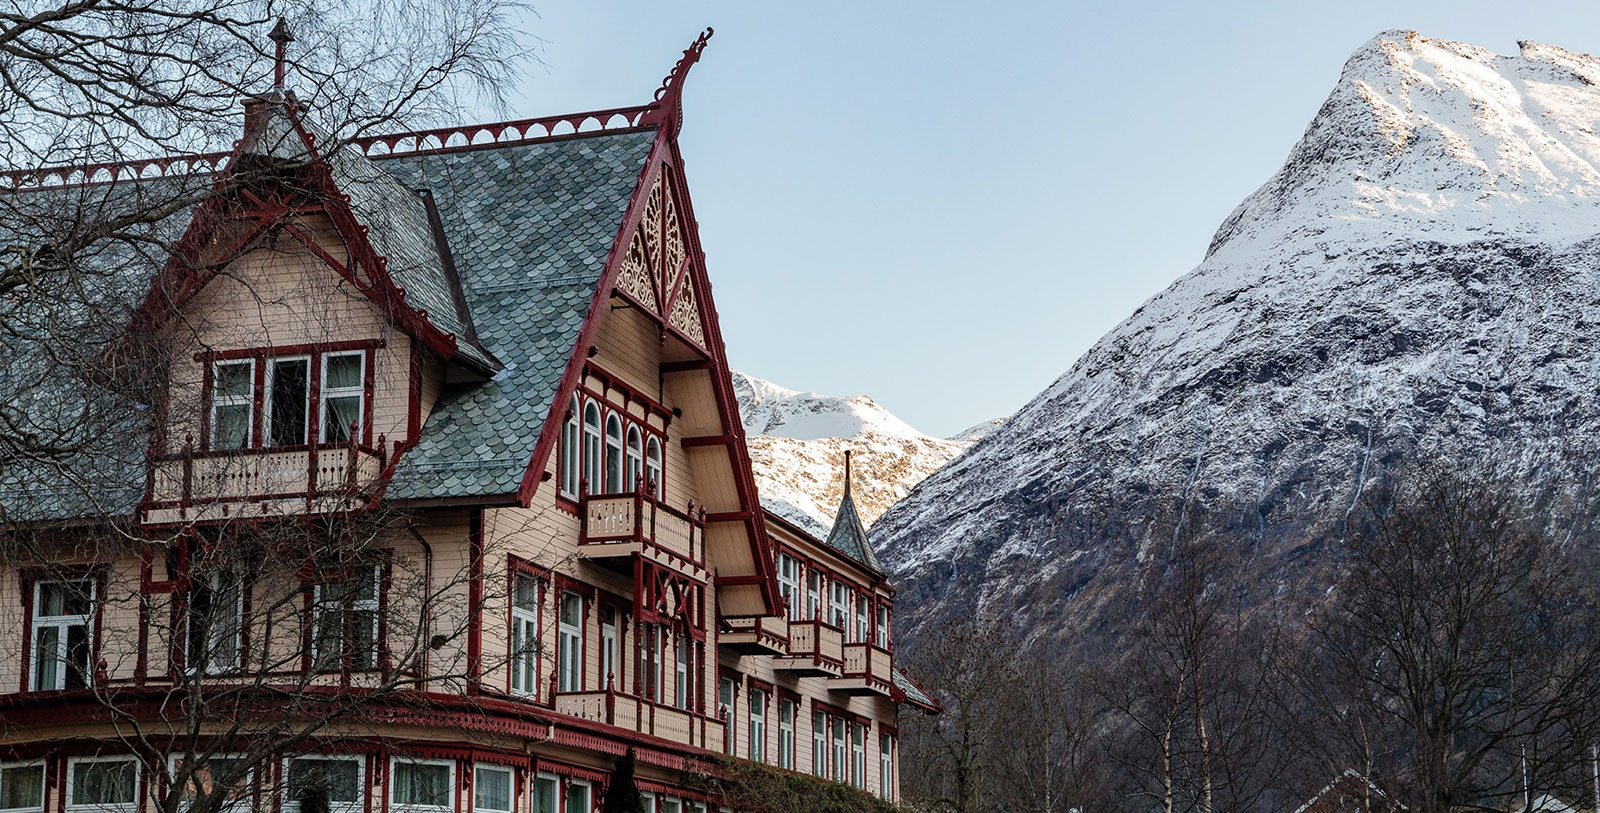 Take a day trip to Ålesund to visit the Sunnmøre Museum, the Jugendstilsenteret, and The Art Nouveau Town district.